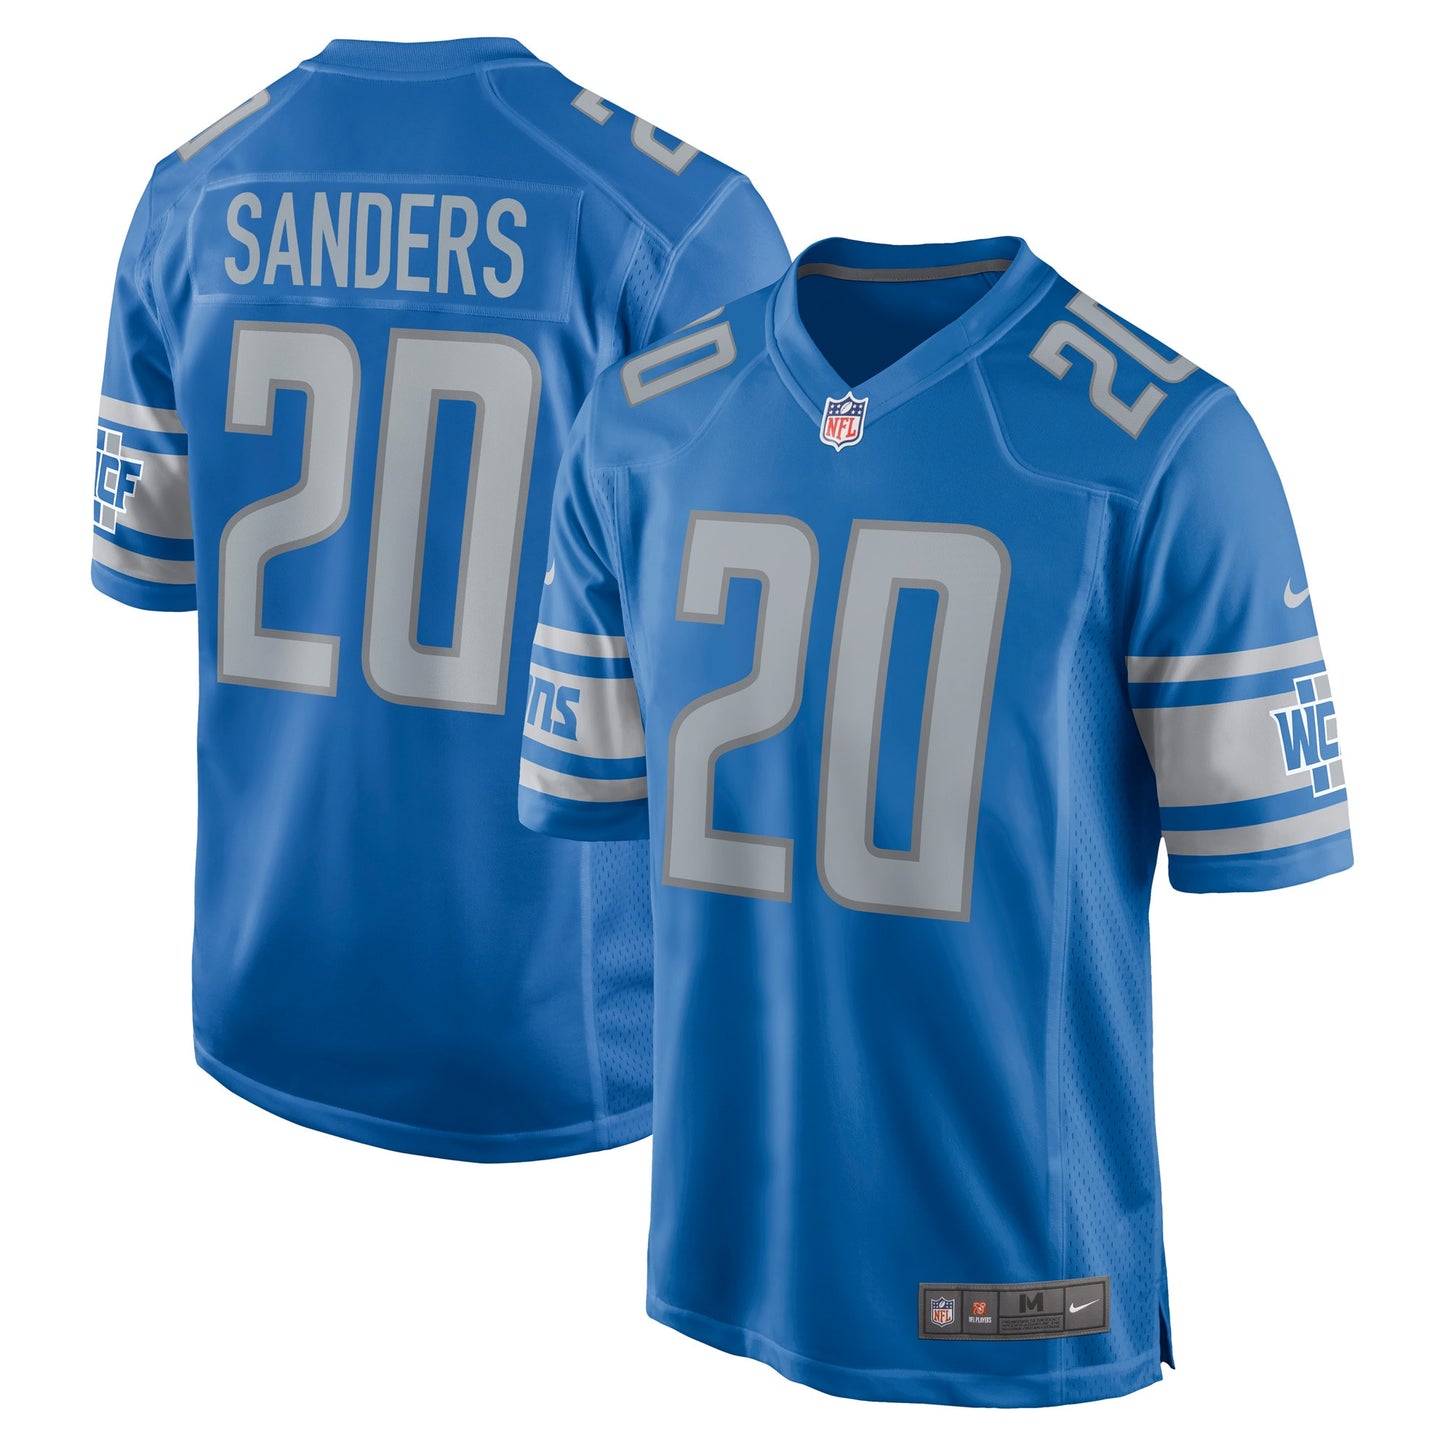 Barry Sanders Detroit Lions Nike Game Retired Player Jersey - Blue